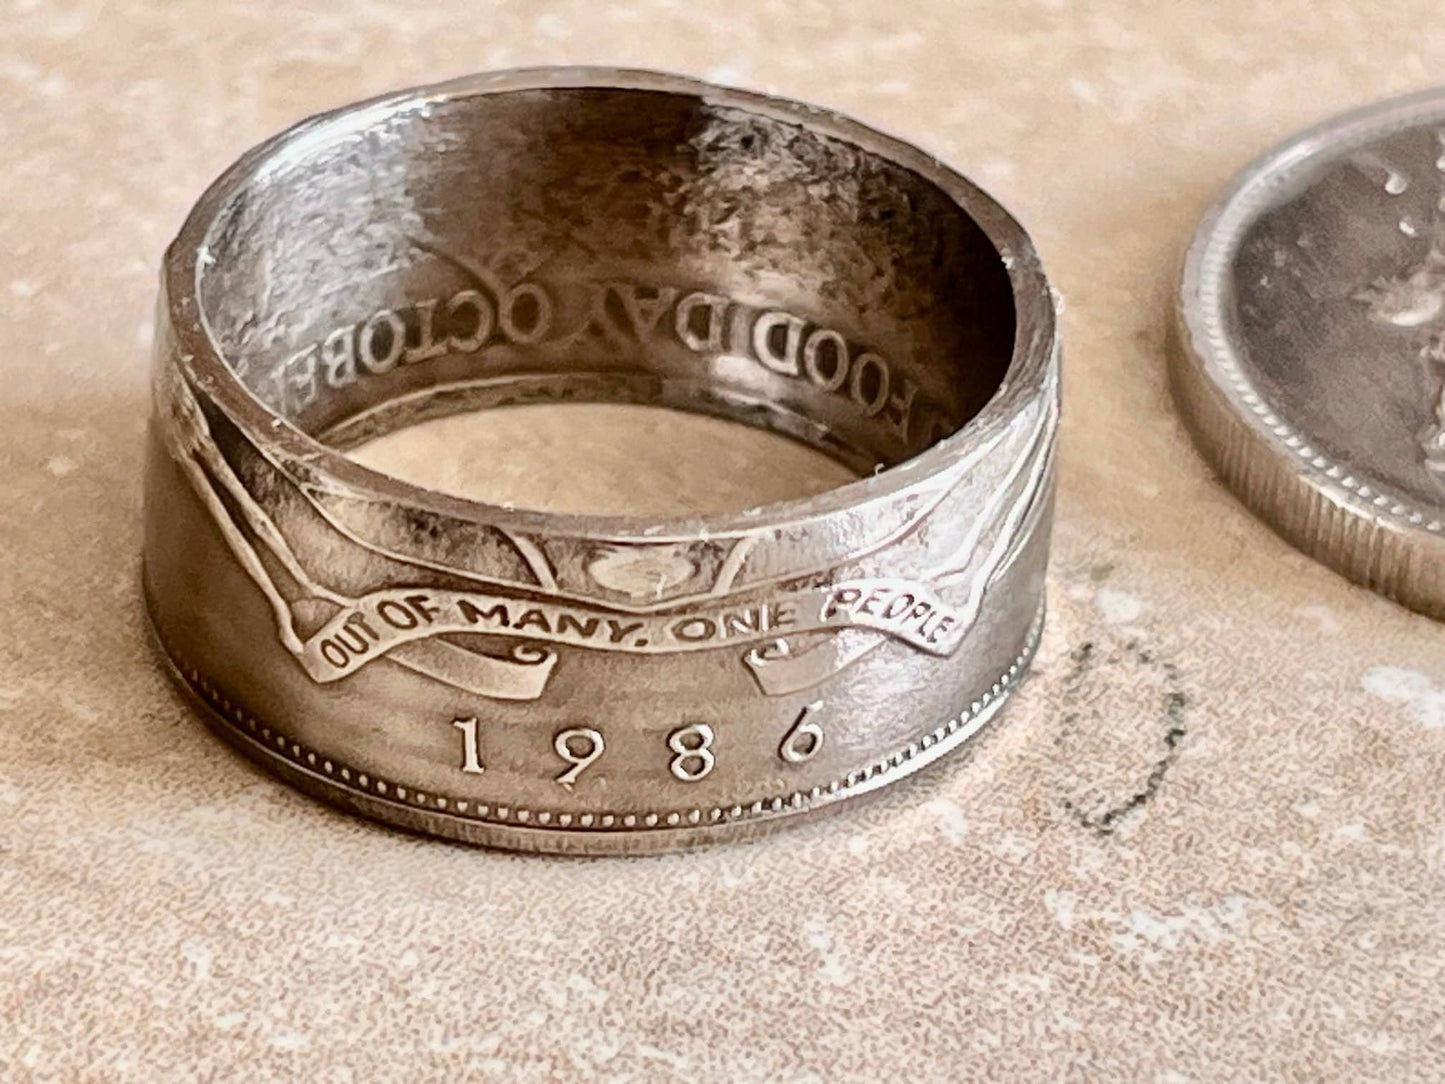 Jamaica Coin Ring 20 Cent Jamaican Handmade Personal Charm Jewelry Ring Gift For Friend Coin Ring Gift For Him Her World Coin Collector